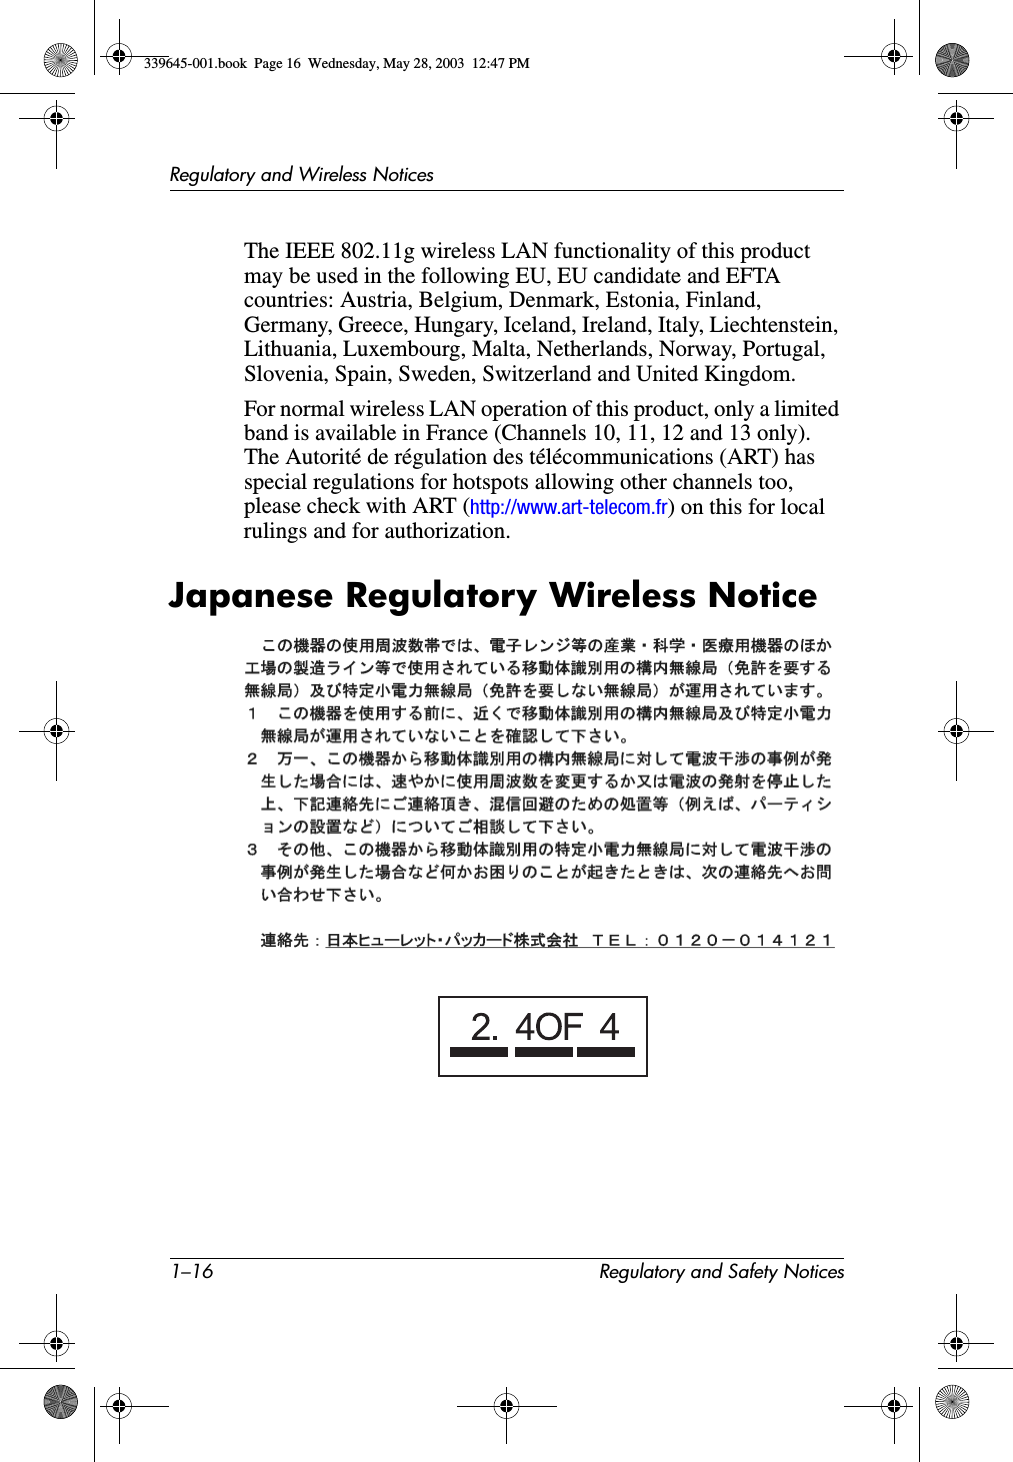 1–16 Regulatory and Safety NoticesRegulatory and Wireless NoticesThe IEEE 802.11g wireless LAN functionality of this product may be used in the following EU, EU candidate and EFTA countries: Austria, Belgium, Denmark, Estonia, Finland, Germany, Greece, Hungary, Iceland, Ireland, Italy, Liechtenstein, Lithuania, Luxembourg, Malta, Netherlands, Norway, Portugal, Slovenia, Spain, Sweden, Switzerland and United Kingdom.For normal wireless LAN operation of this product, only a limited band is available in France (Channels 10, 11, 12 and 13 only). The Autorité de régulation des télécommunications (ART) has special regulations for hotspots allowing other channels too, please check with ART (http://www.art-telecom.fr) on this for local rulings and for authorization.Japanese Regulatory Wireless Notice339645-001.book  Page 16  Wednesday, May 28, 2003  12:47 PM